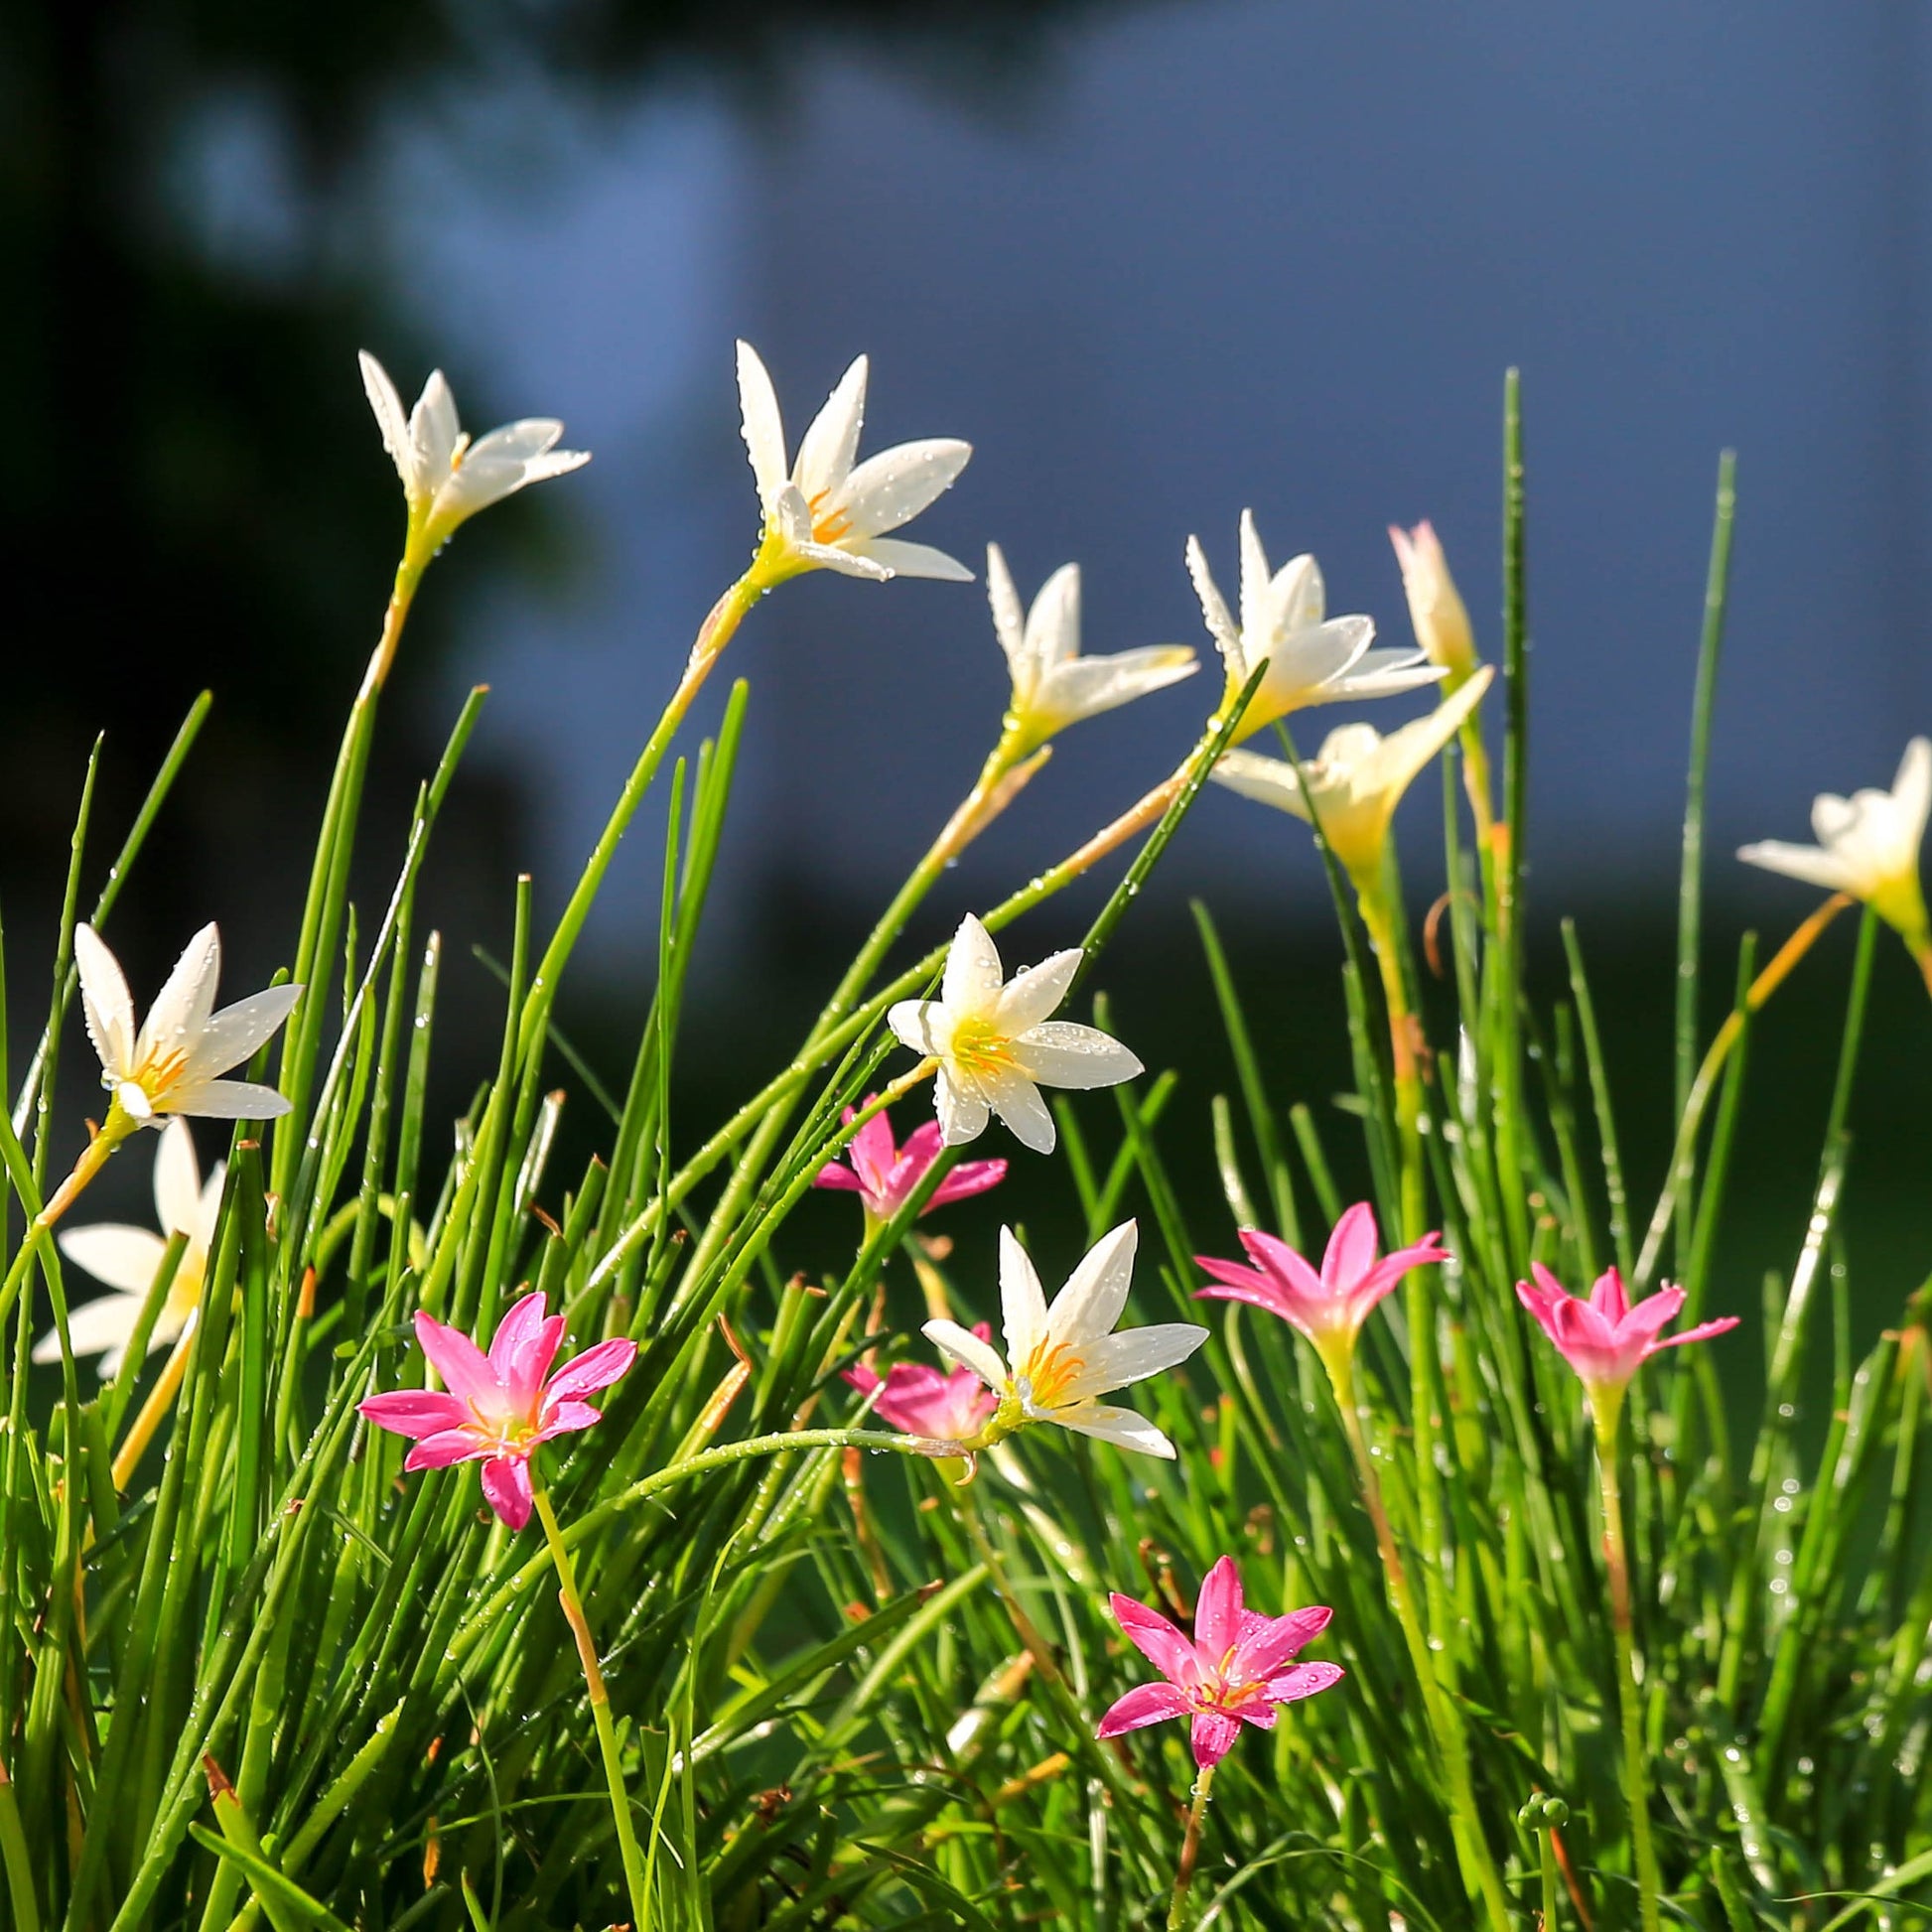 A Collection of Little Pink and White Rain Lily Blooms